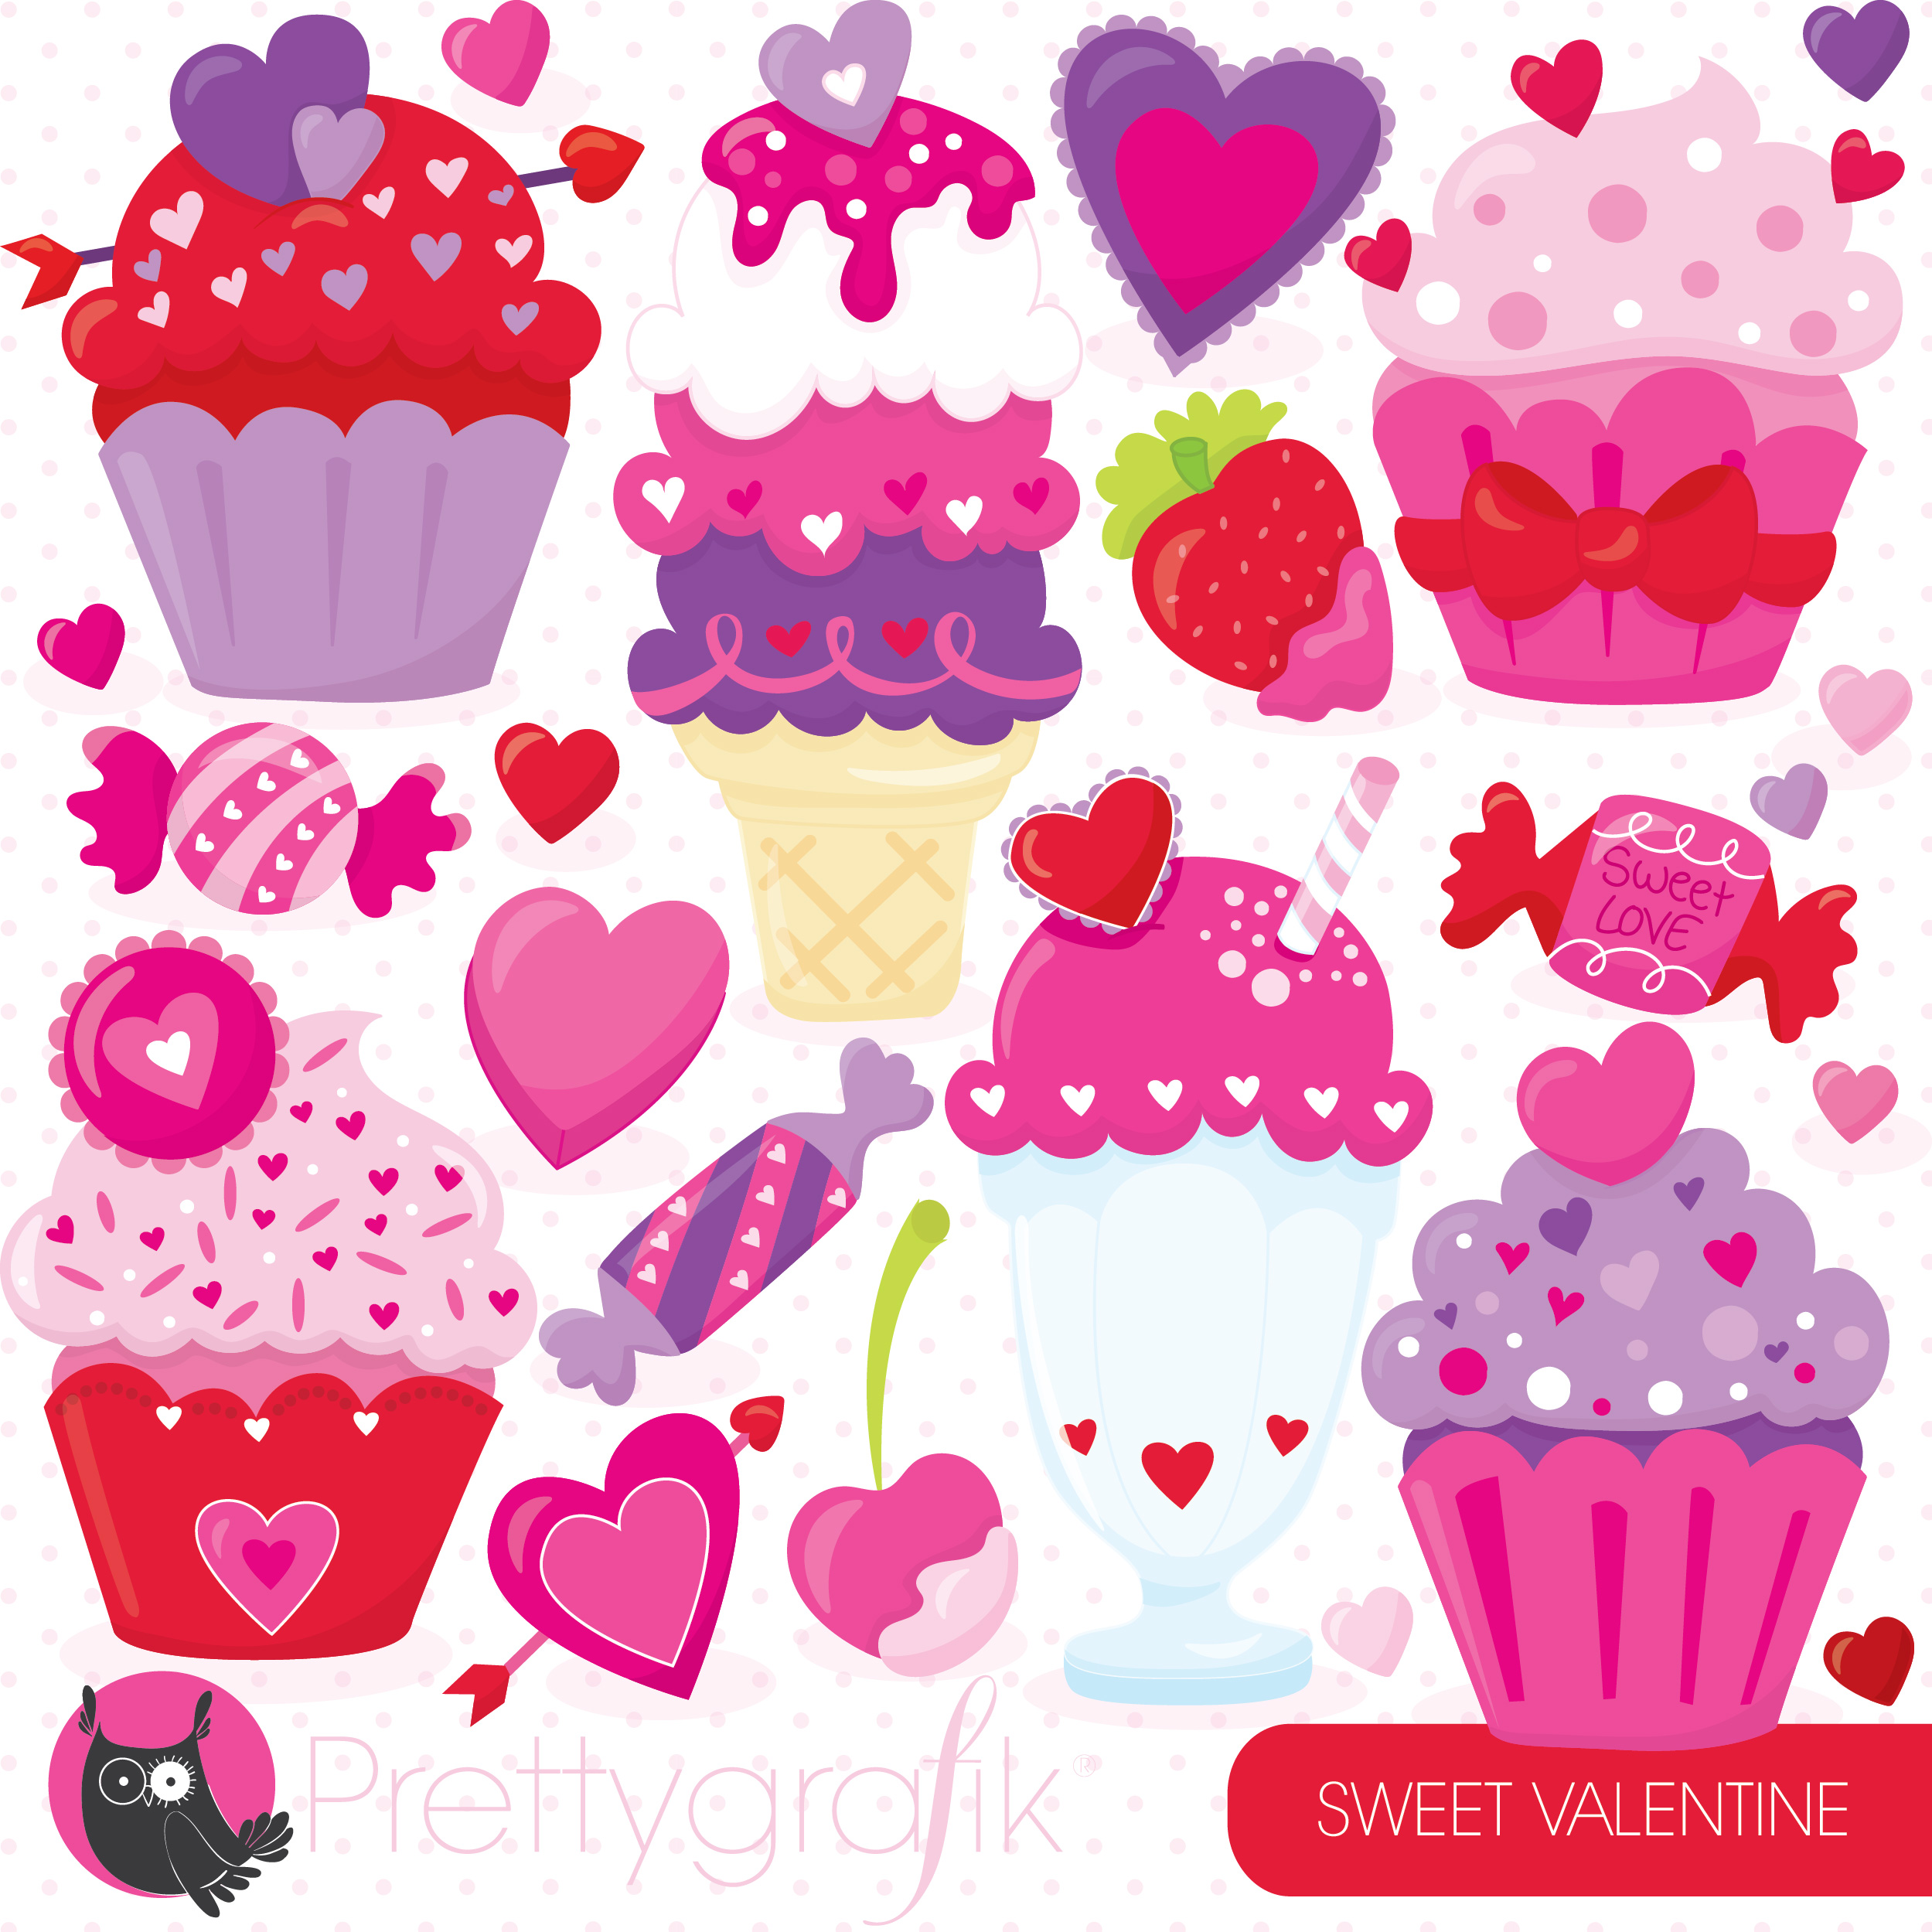 free clipart pictures sweets - photo #38